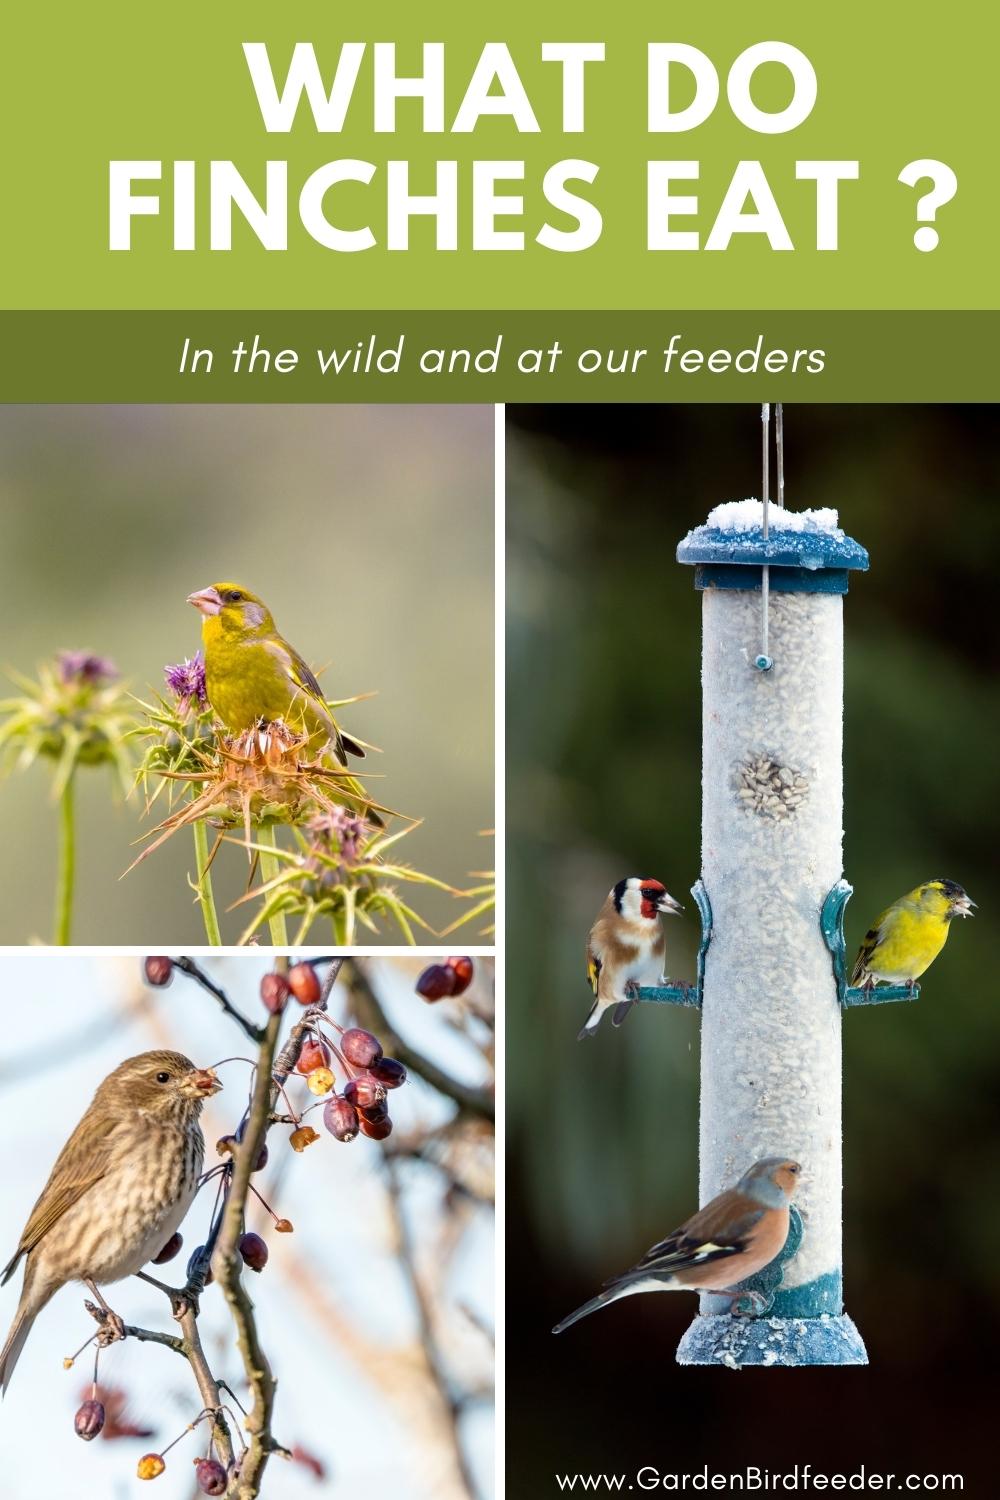 Pinterest Pin - Collage of finches eating - What do finches eat in the wild and at our feeders?